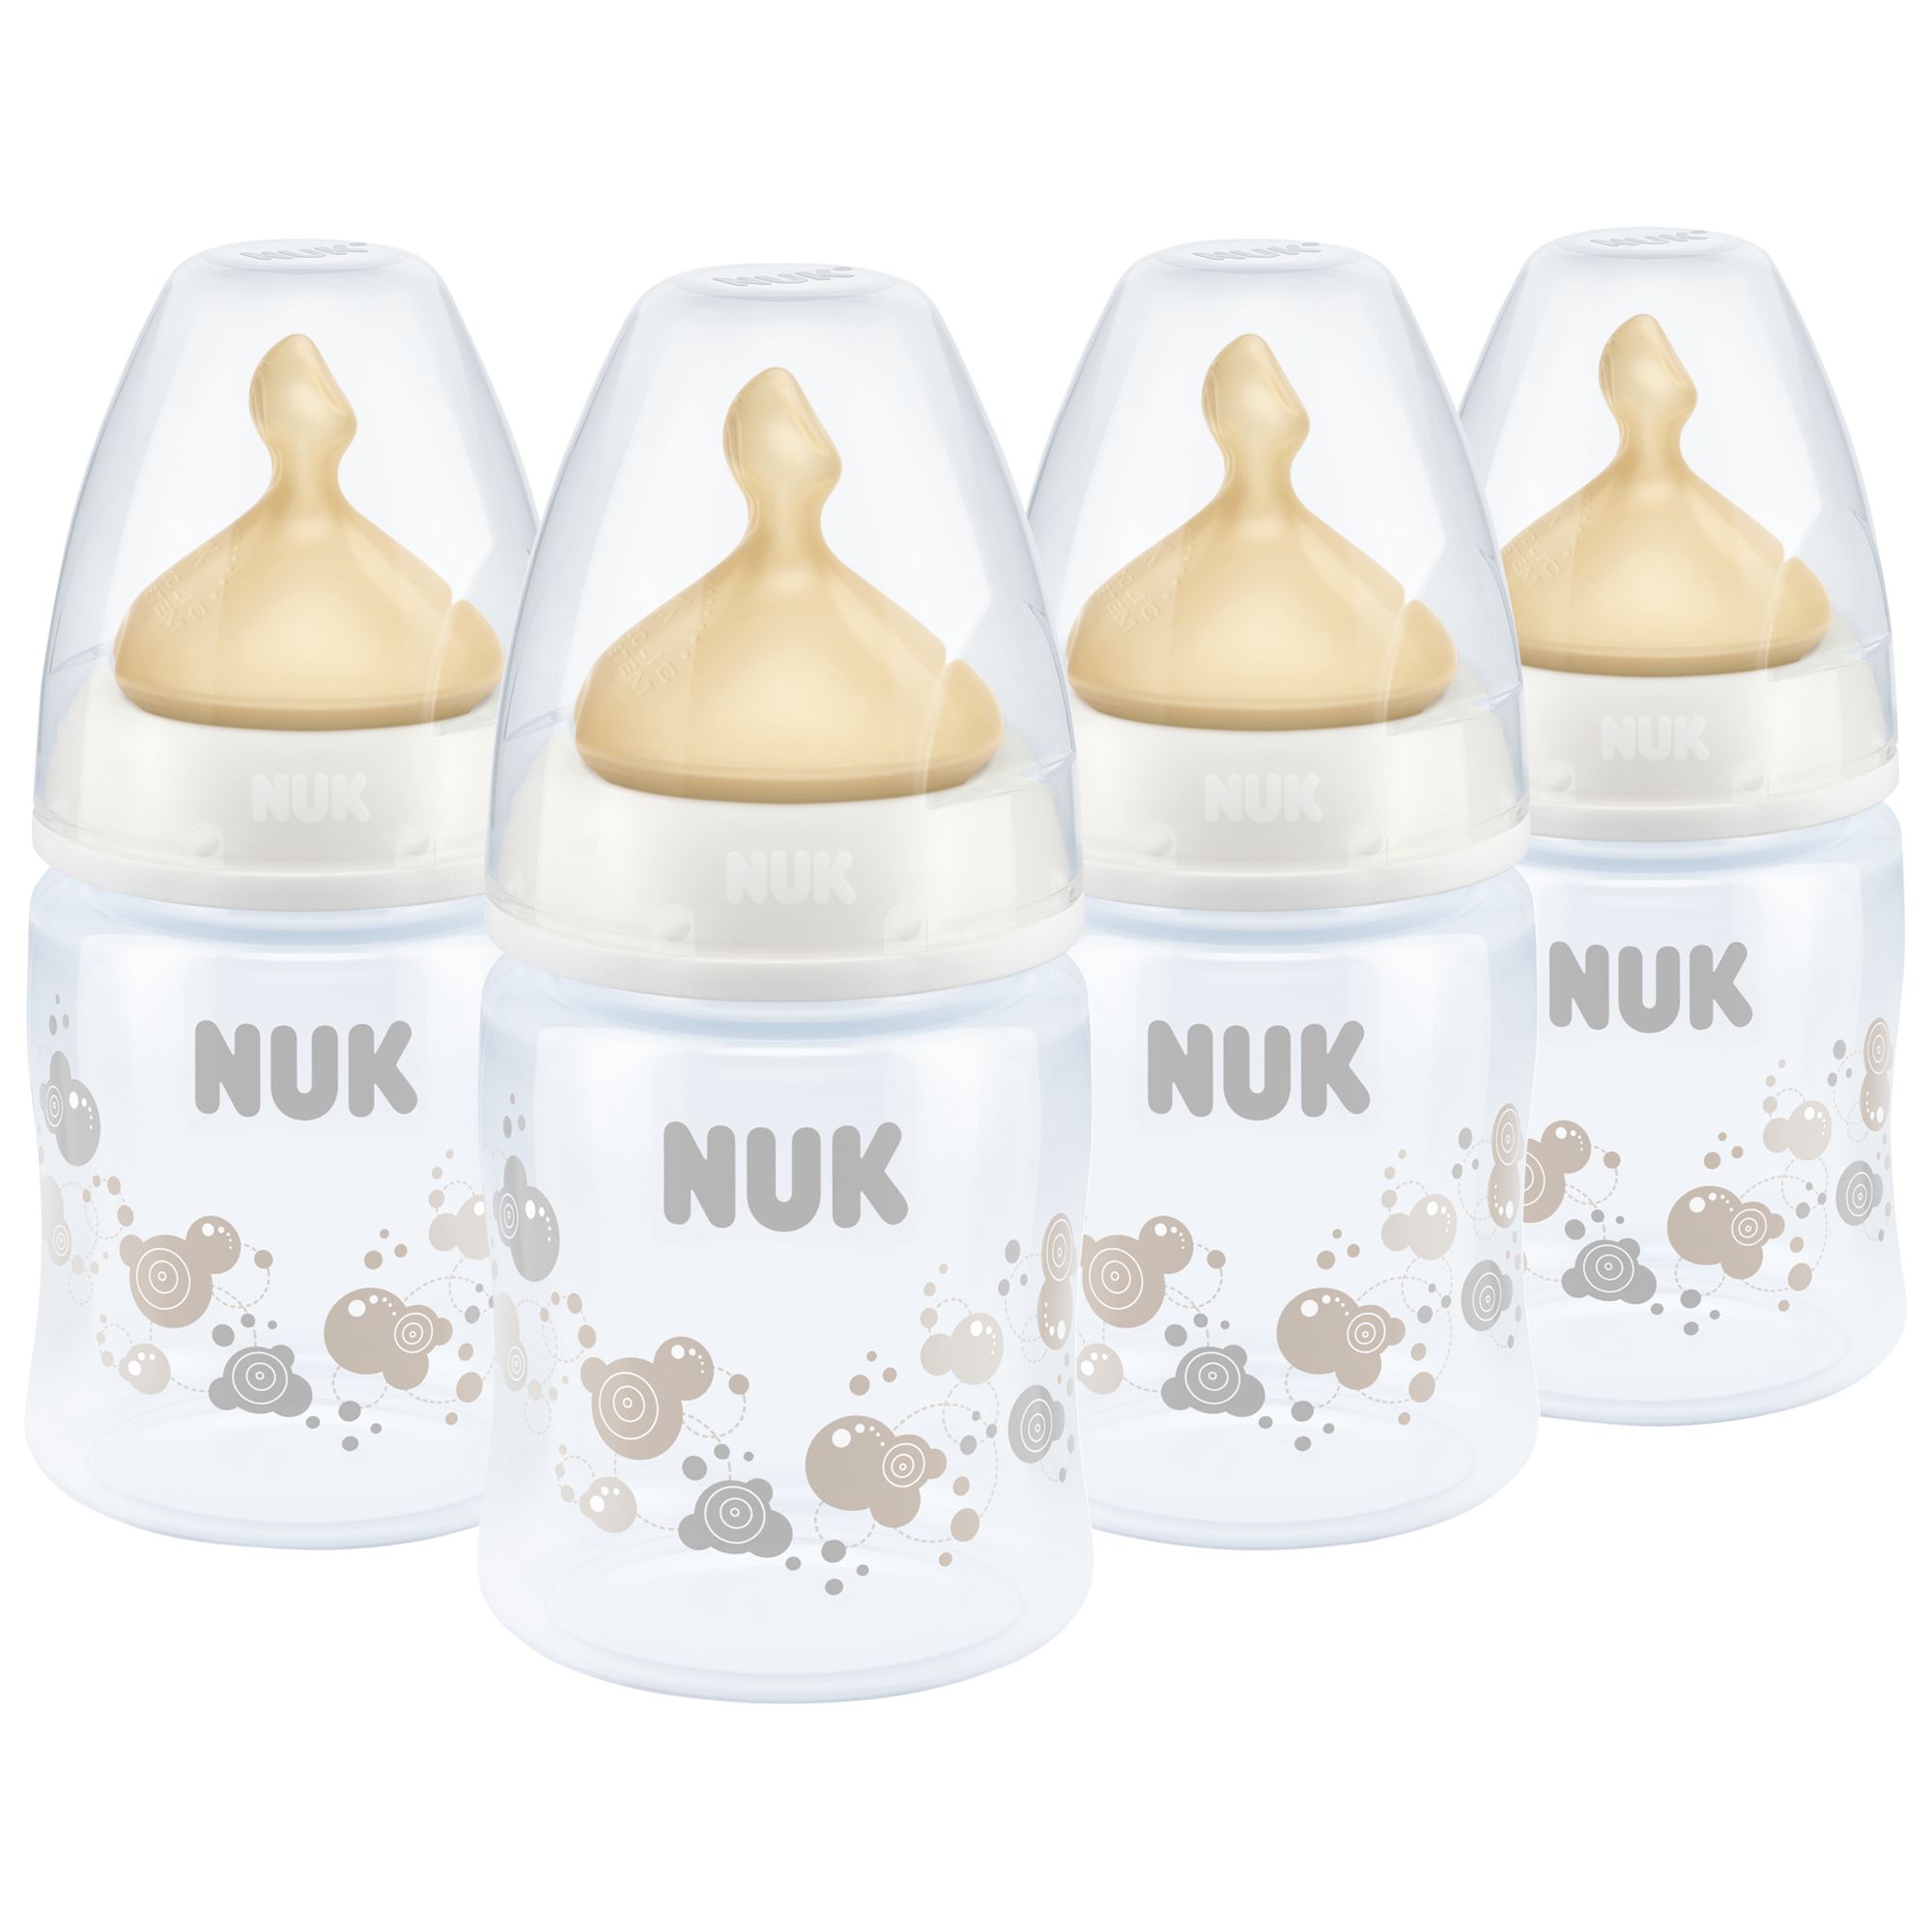 NUK First Choice+ Baby Bottle with Size 1 Latex Teat, 0-6 months, Pack of 4